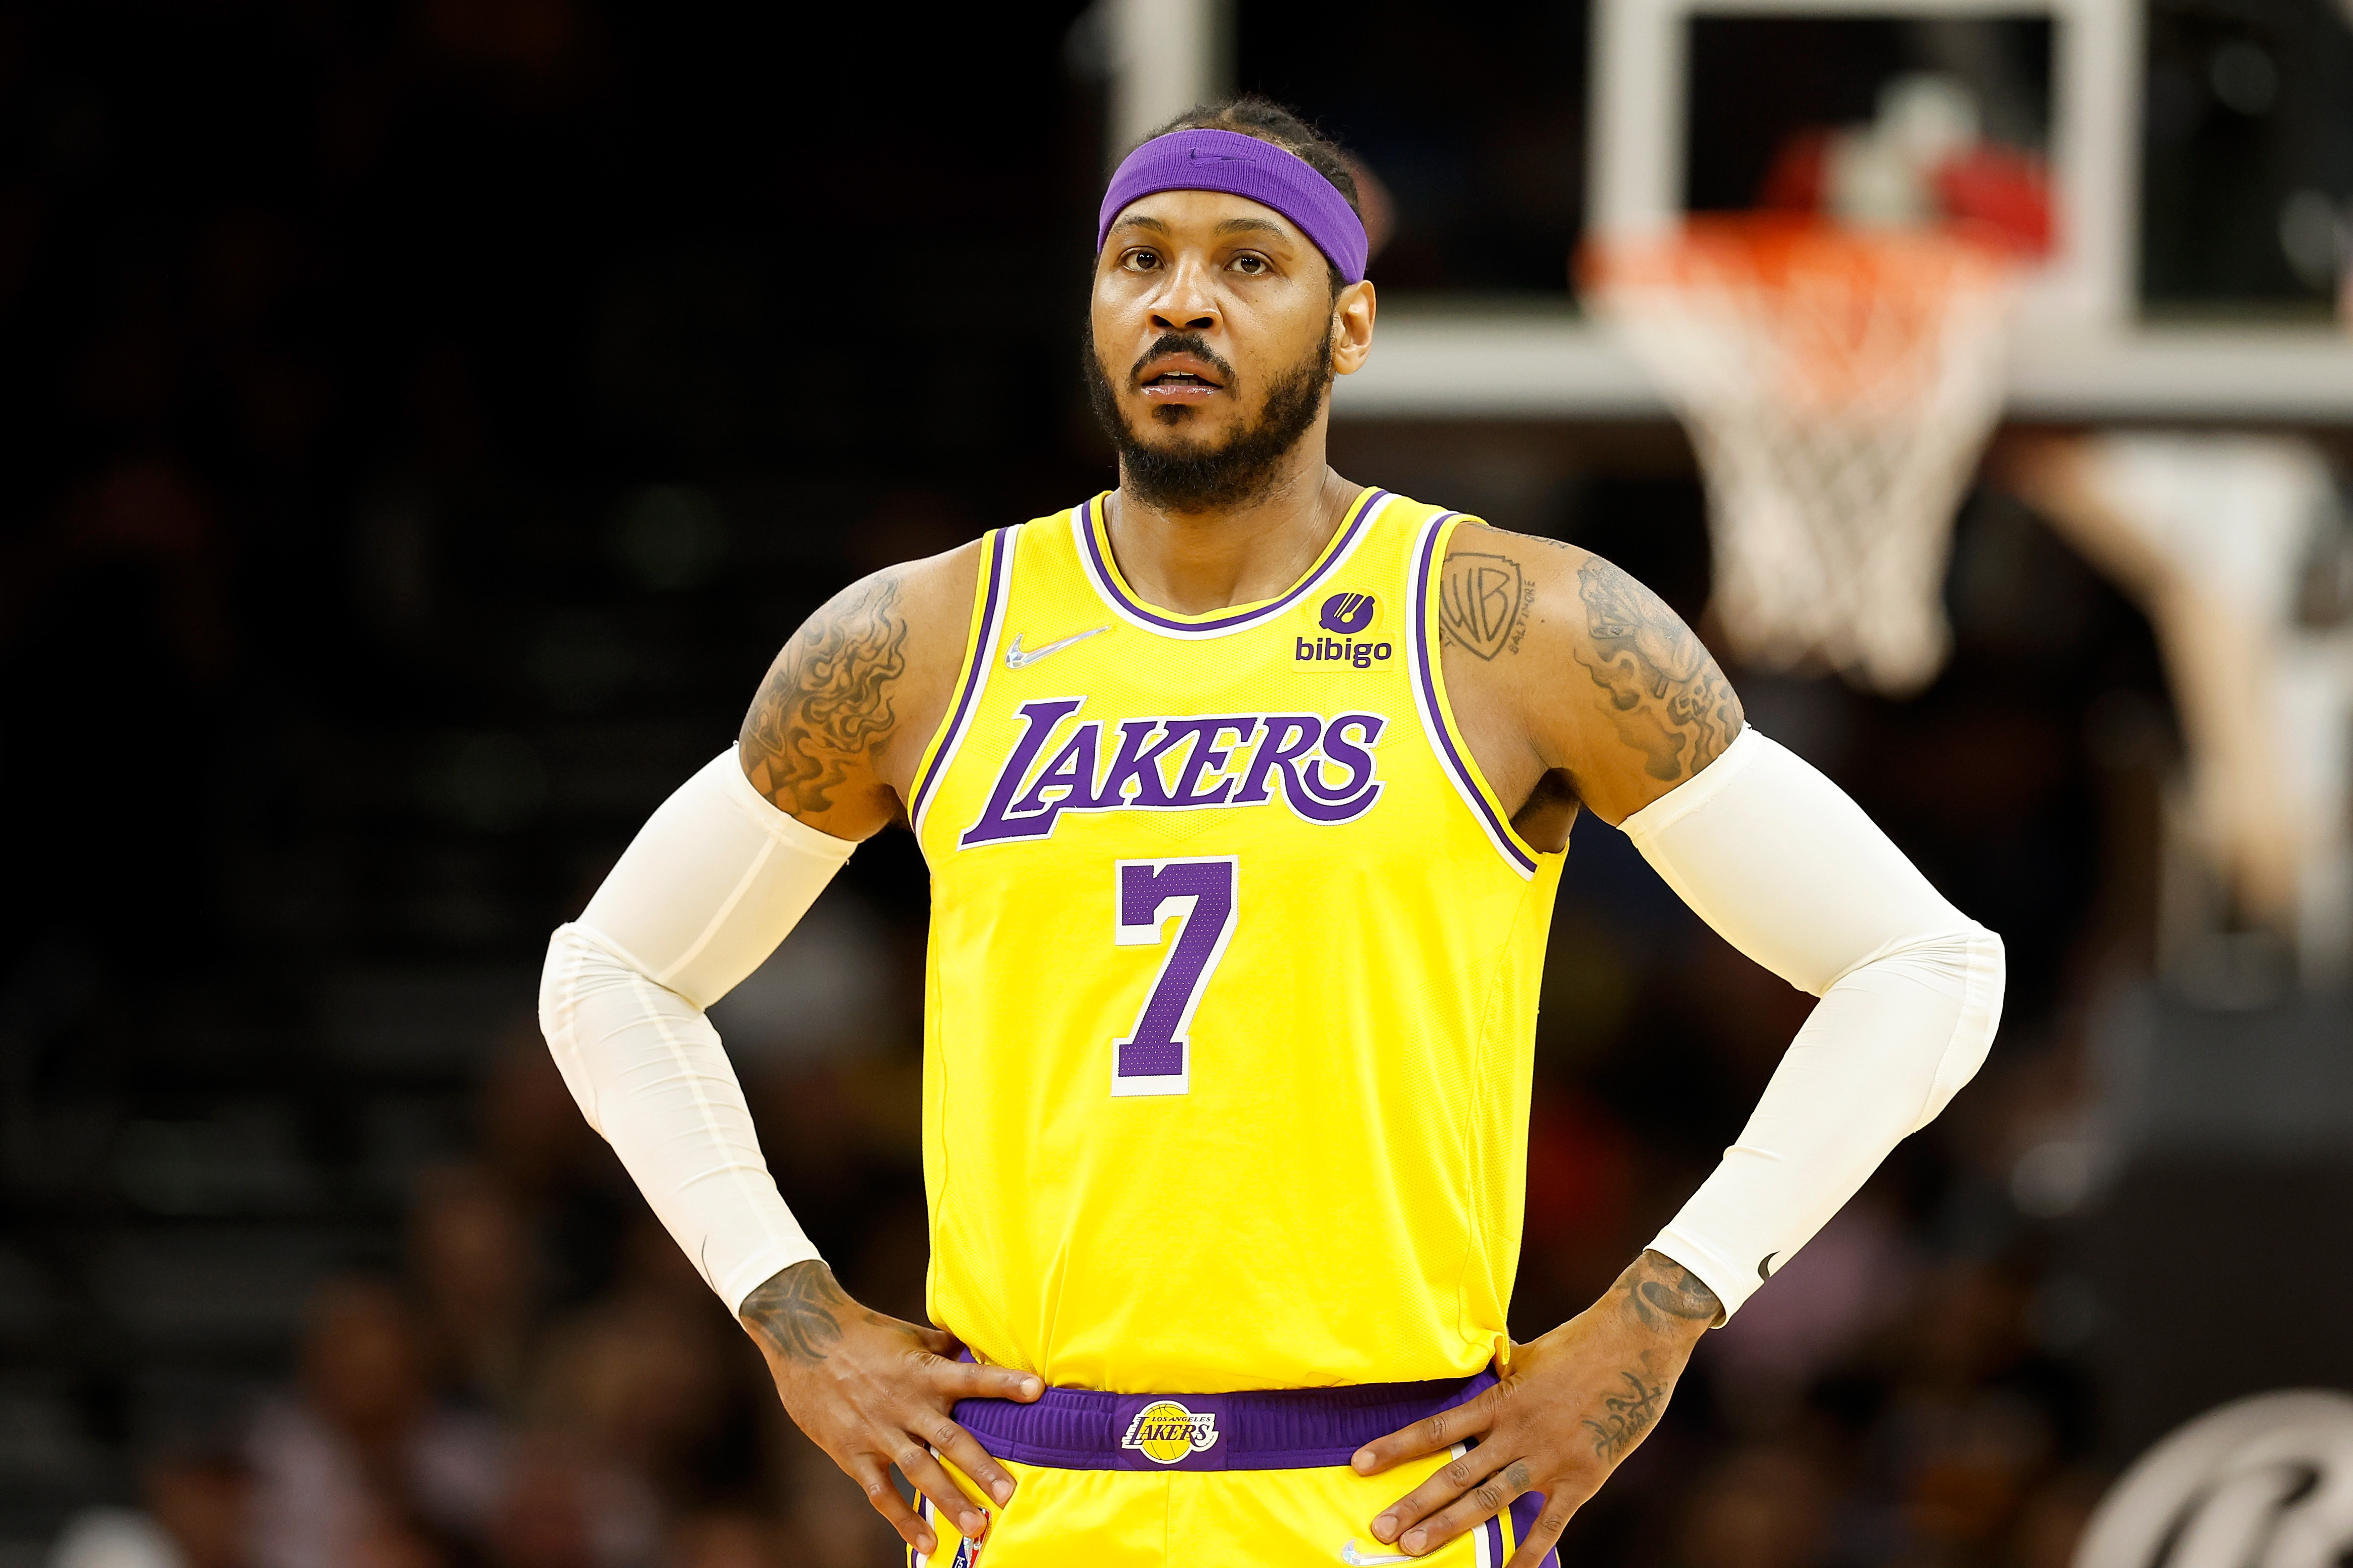 Lakers Video: Carmelo Anthony Works Out With Son Kiyan